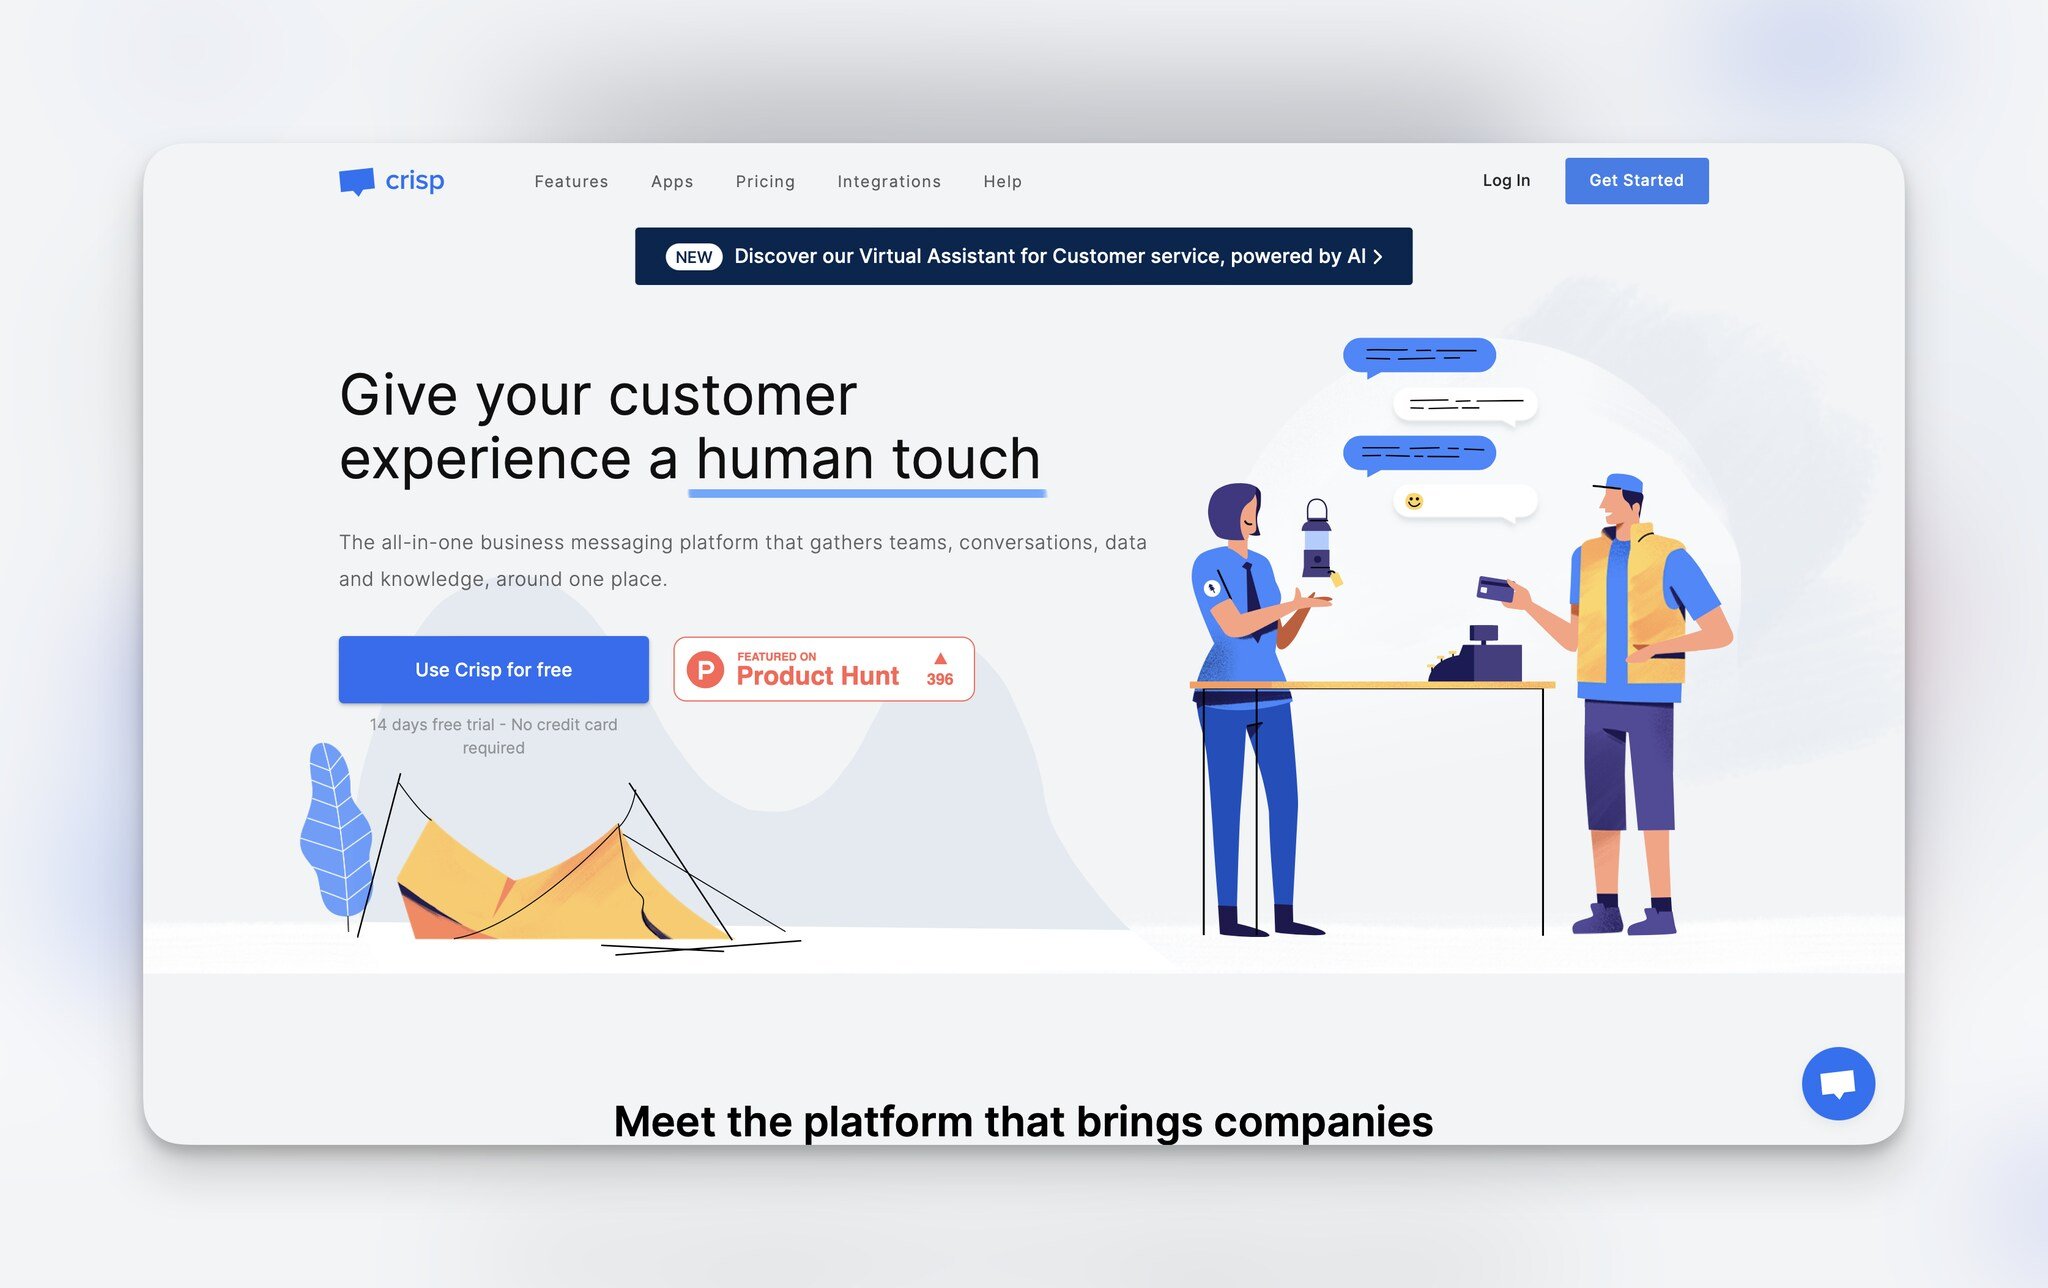 Crisp's homepage with the headline "Give your customer experience a human touch" followed by a blue "Use Crisp for free" button and on the right, there are two people at the counter with chat bubbles between